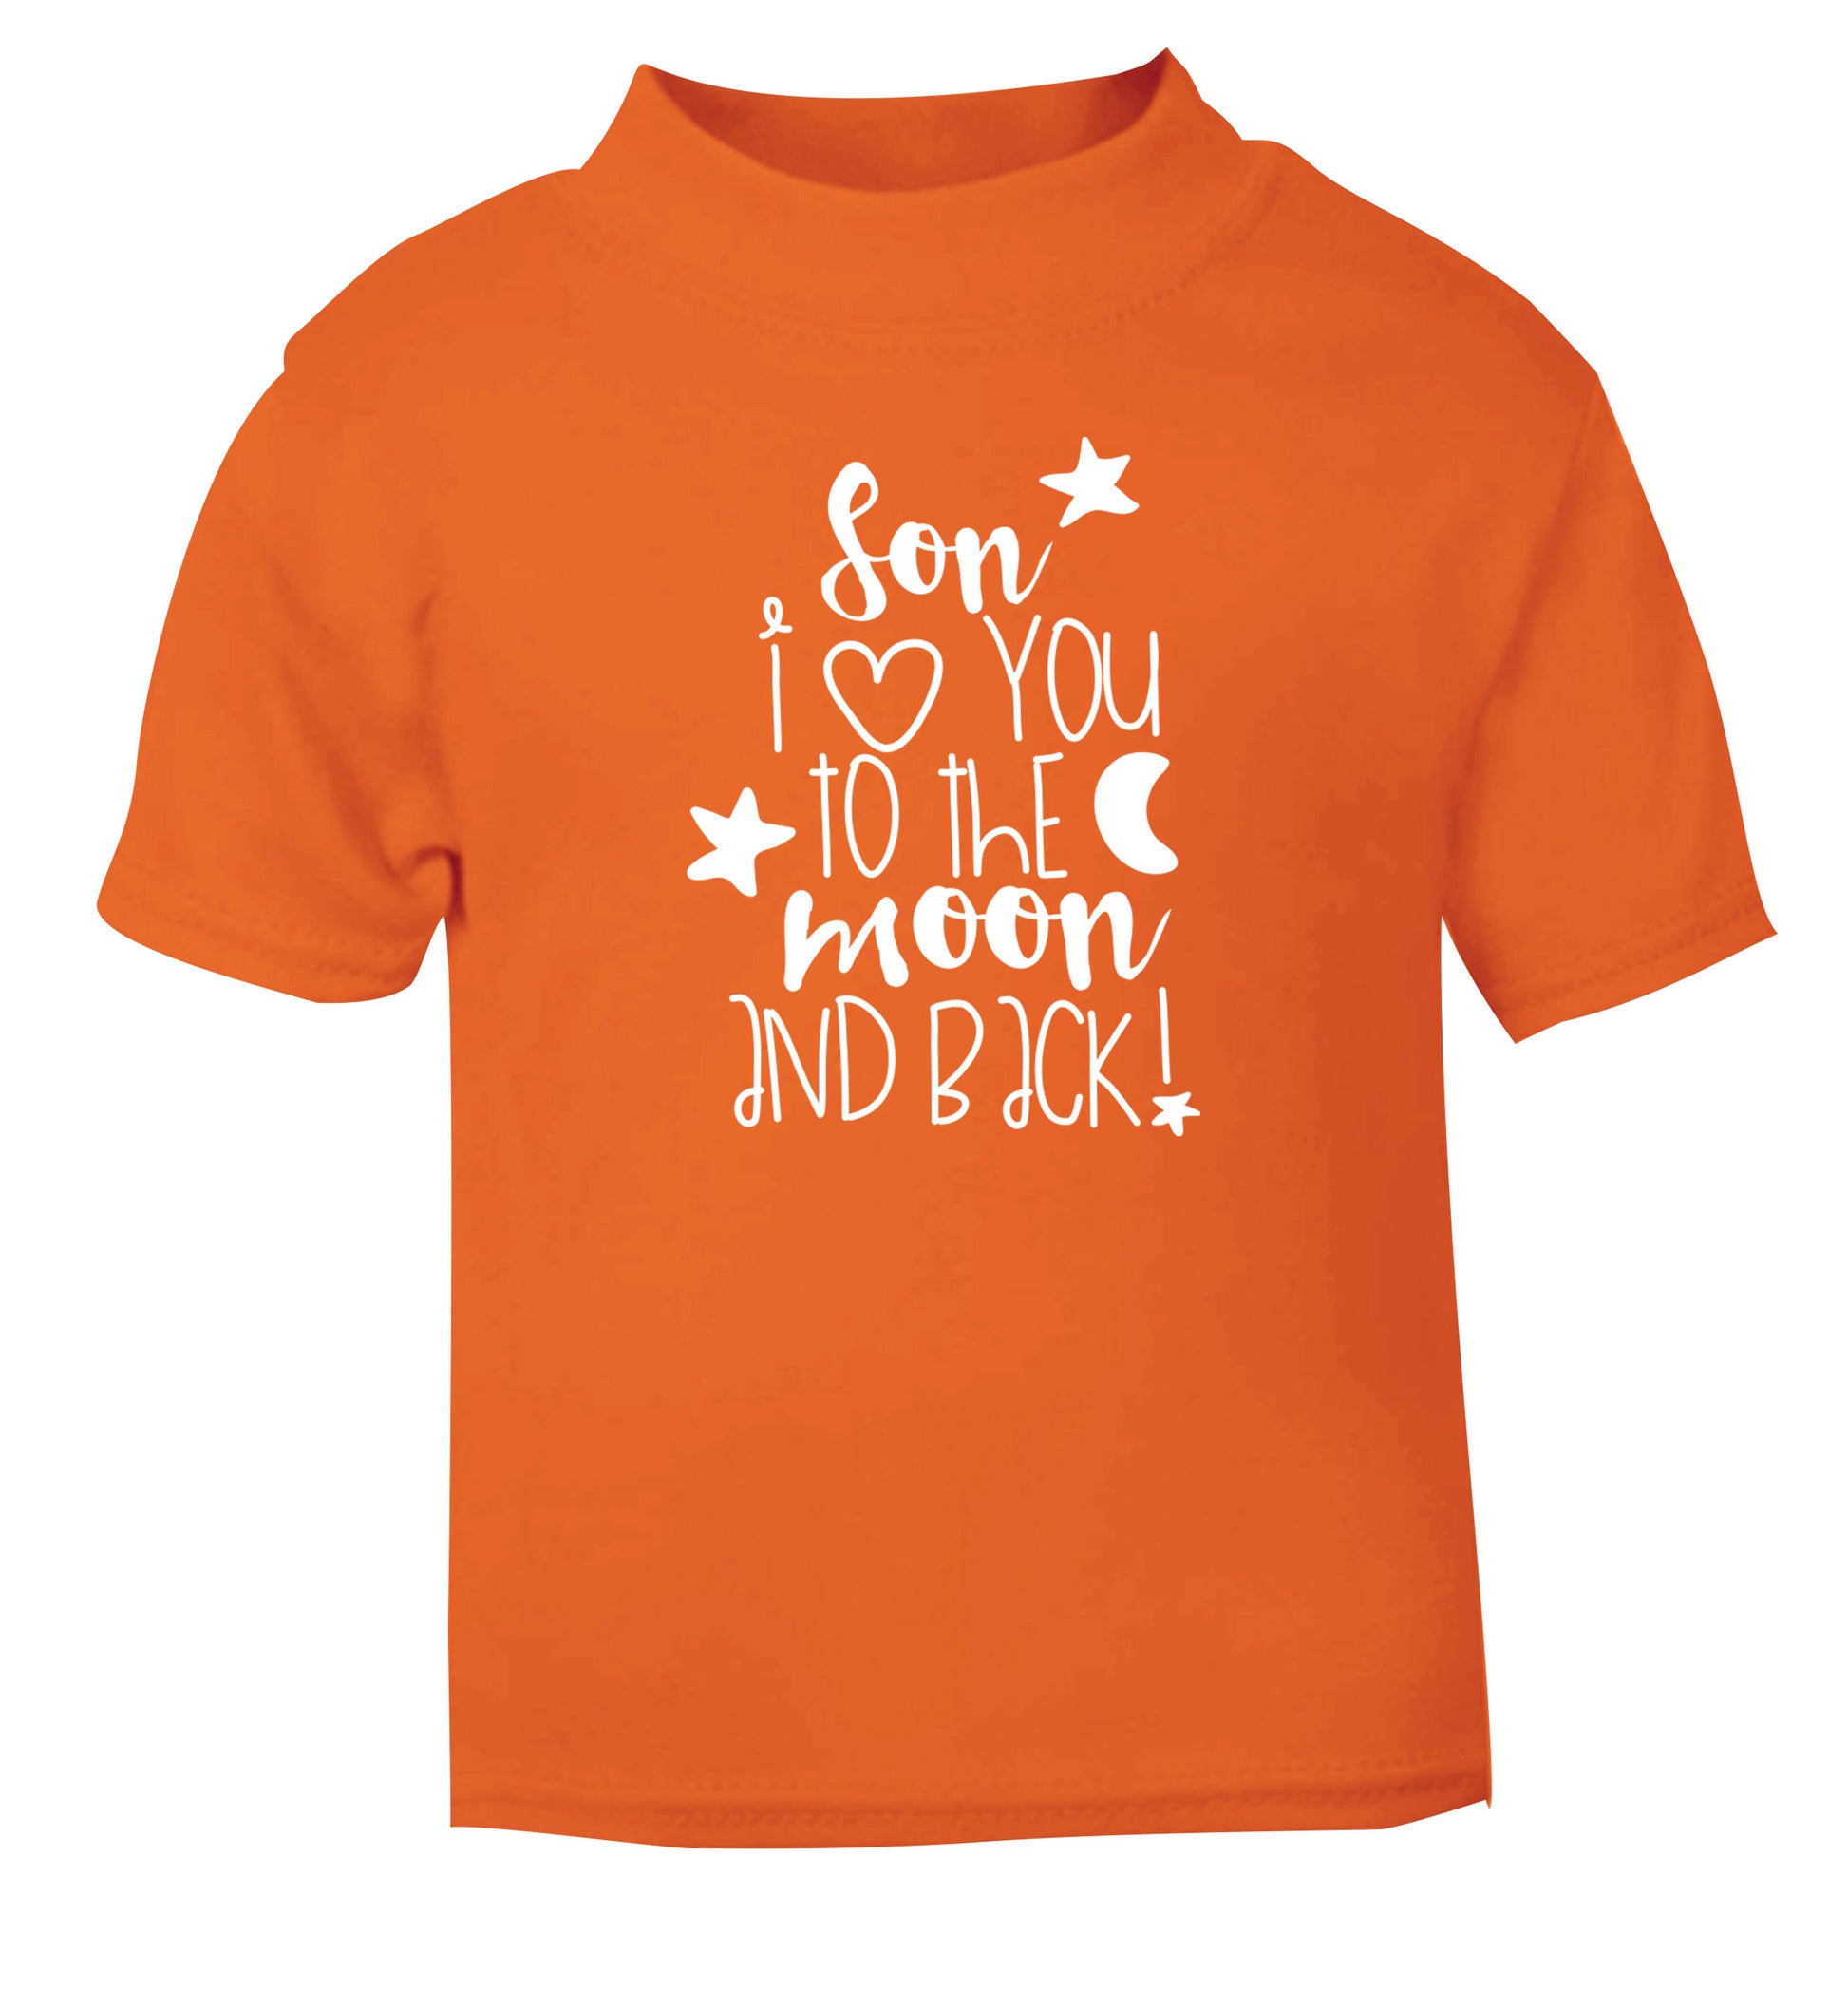 Son I love you to the moon and back orange Baby Toddler Tshirt 2 Years